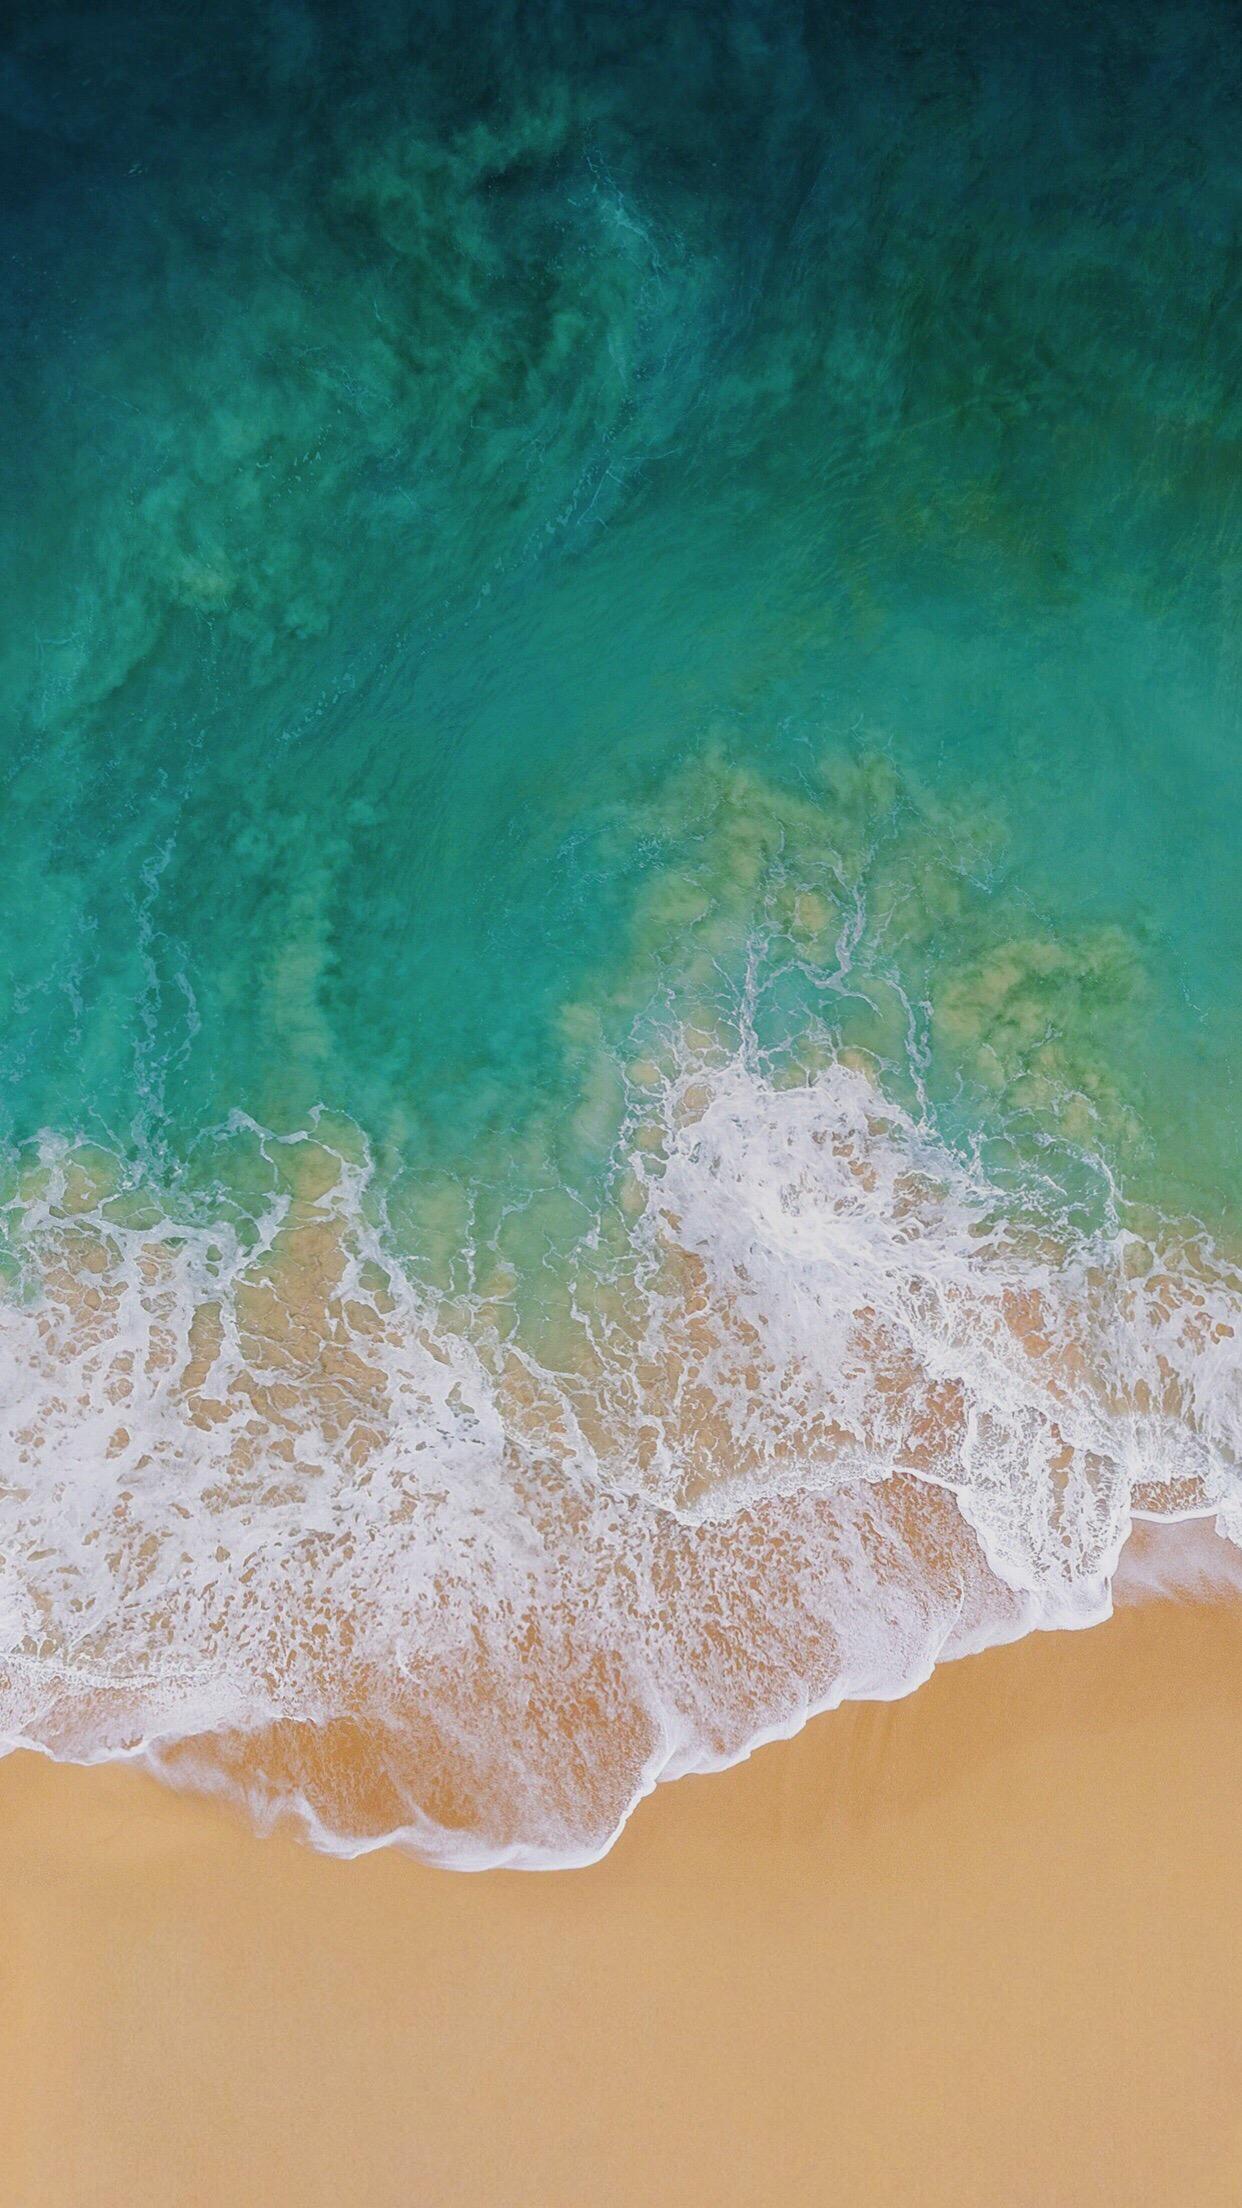 Download The IOS 11 Wallpaper Here (in High Resolution)